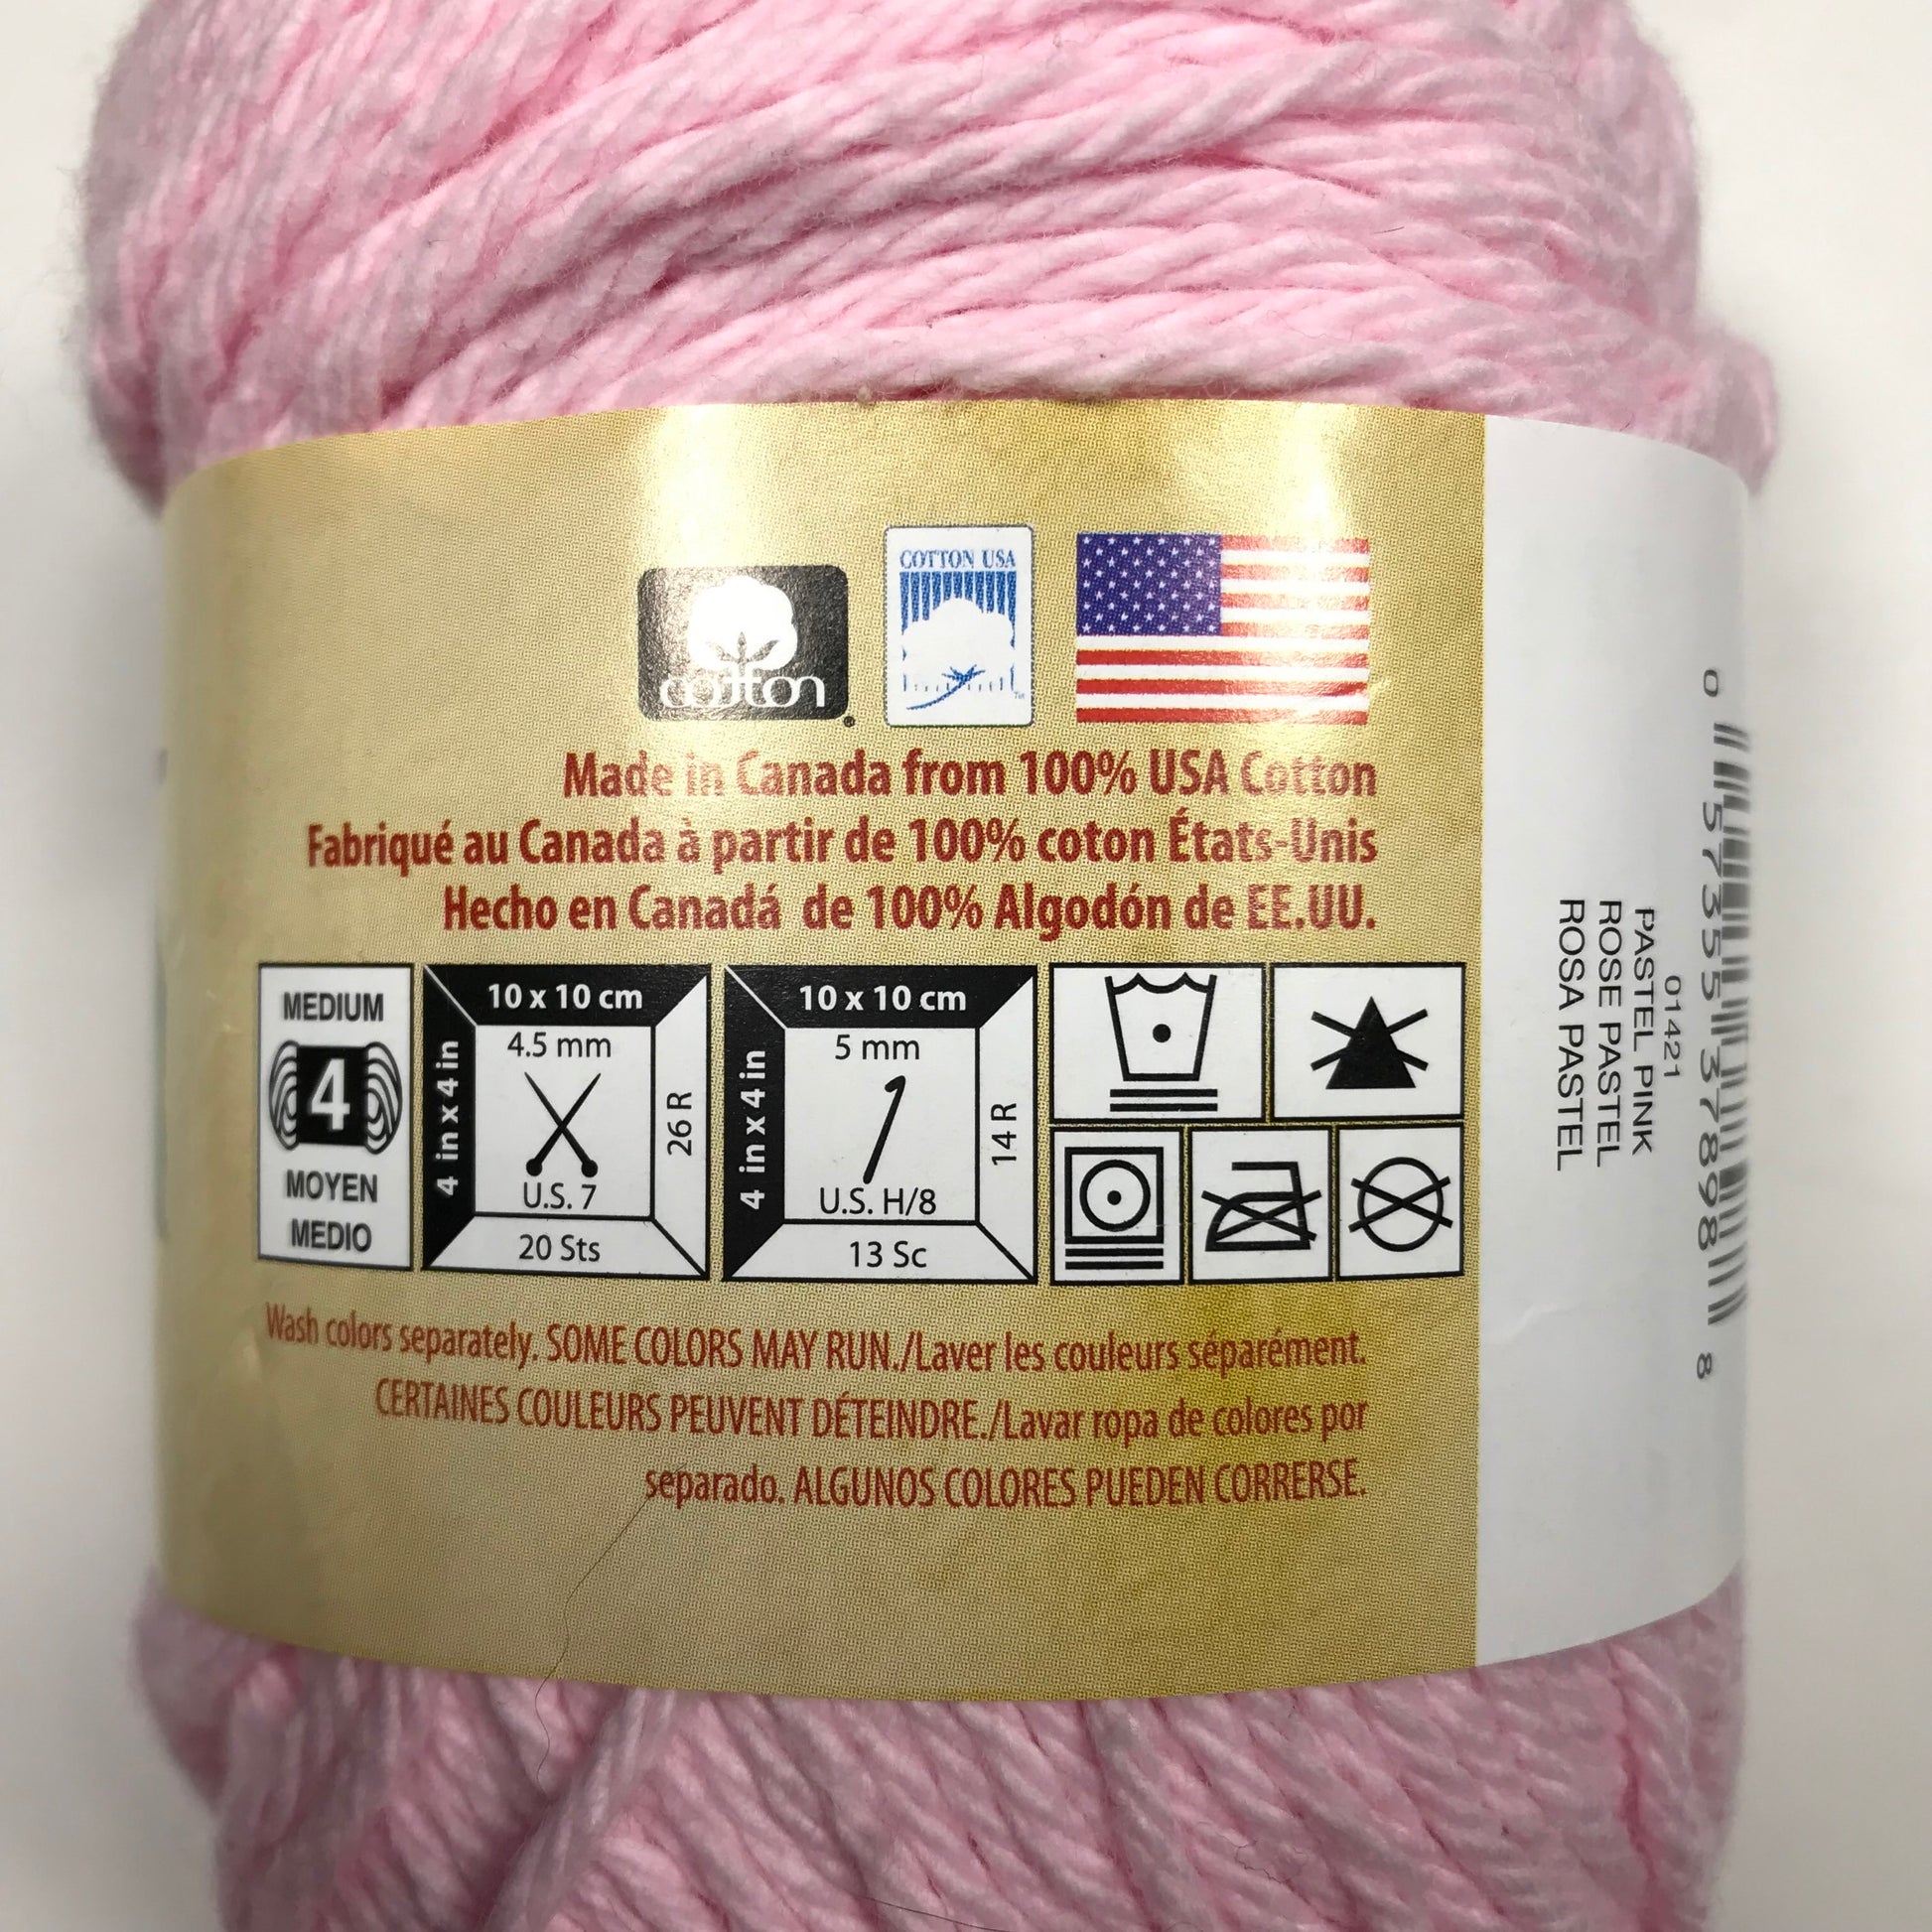 Cotton Yarn in Pink, Peaches and Cream, Pastel Pink Cotton Yarn 